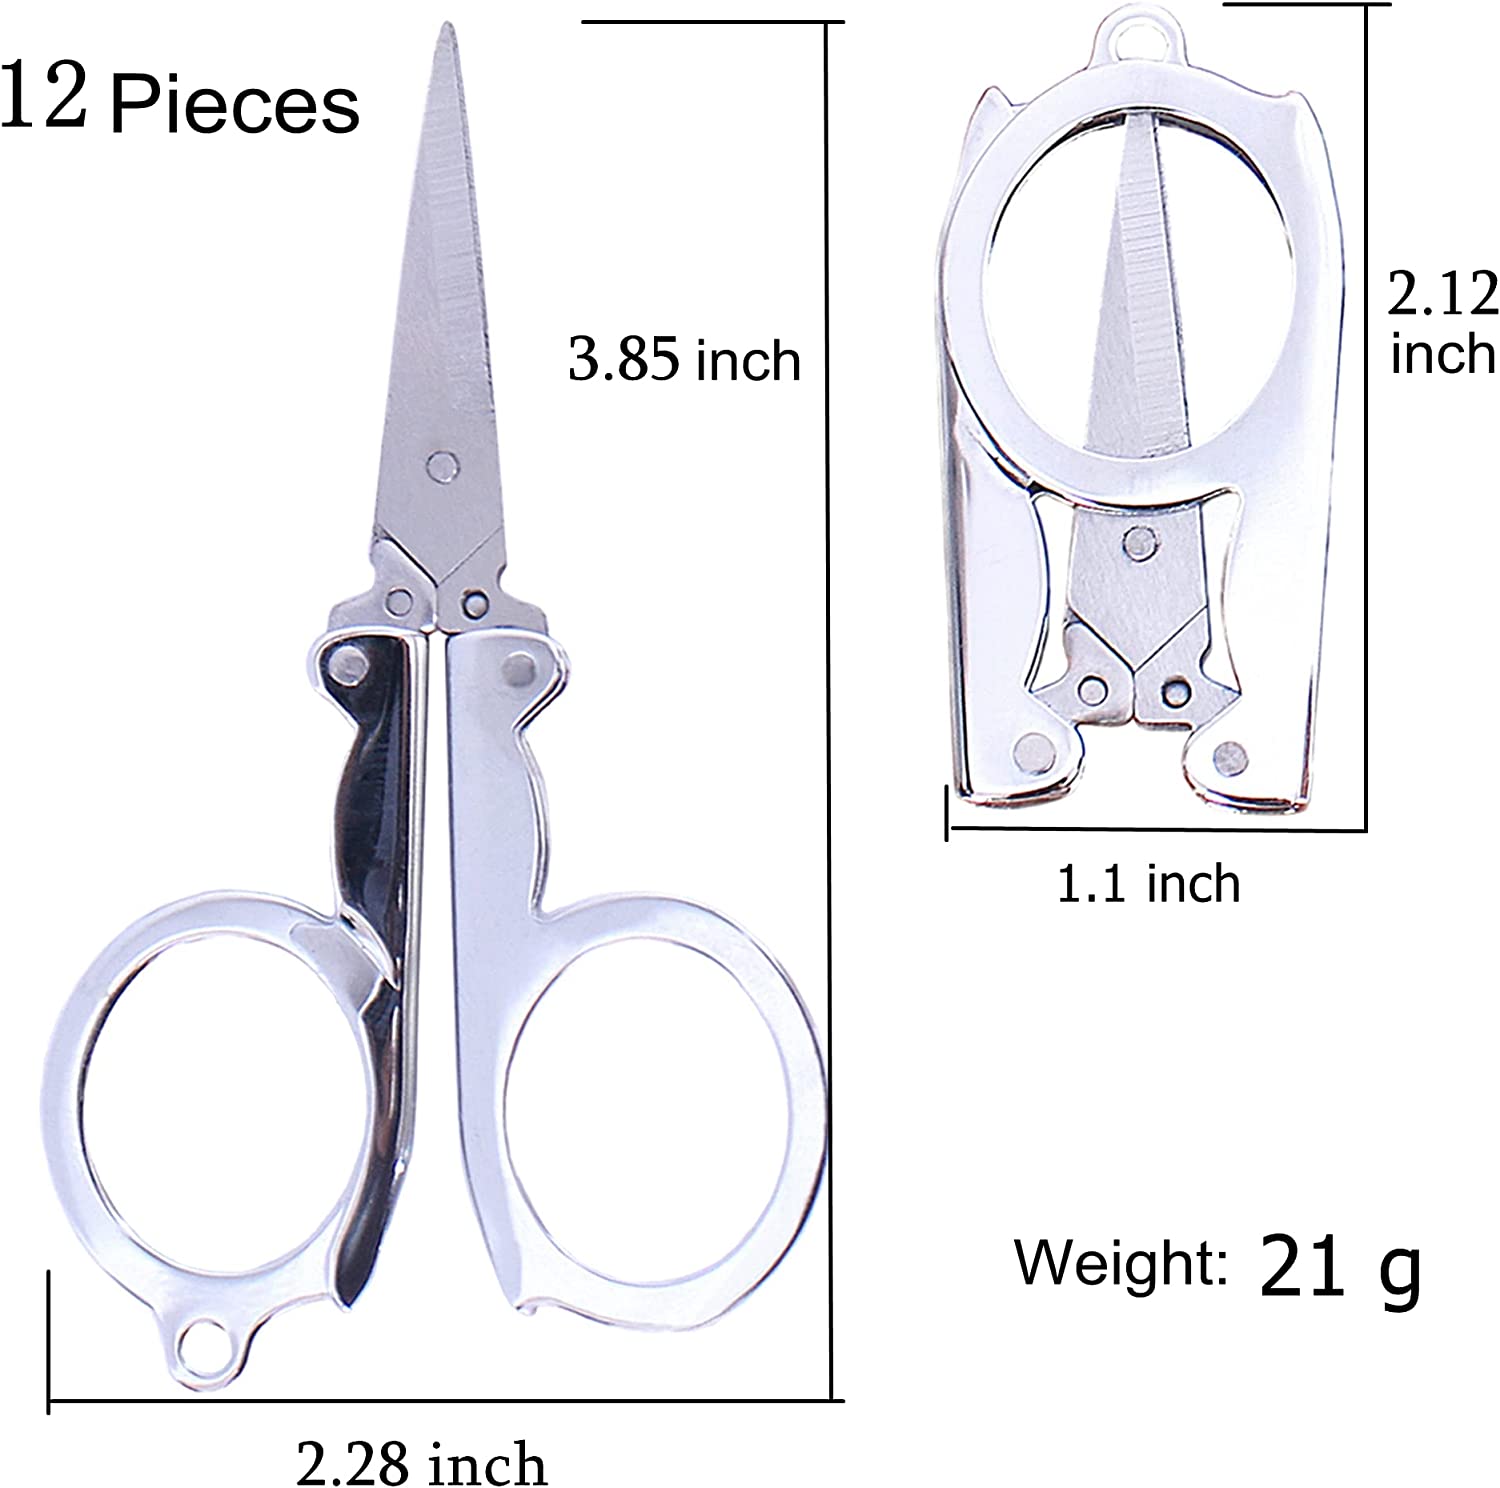 Mini FOLDING SCISSORS Stainless-Steel Portable fits in Pocket or